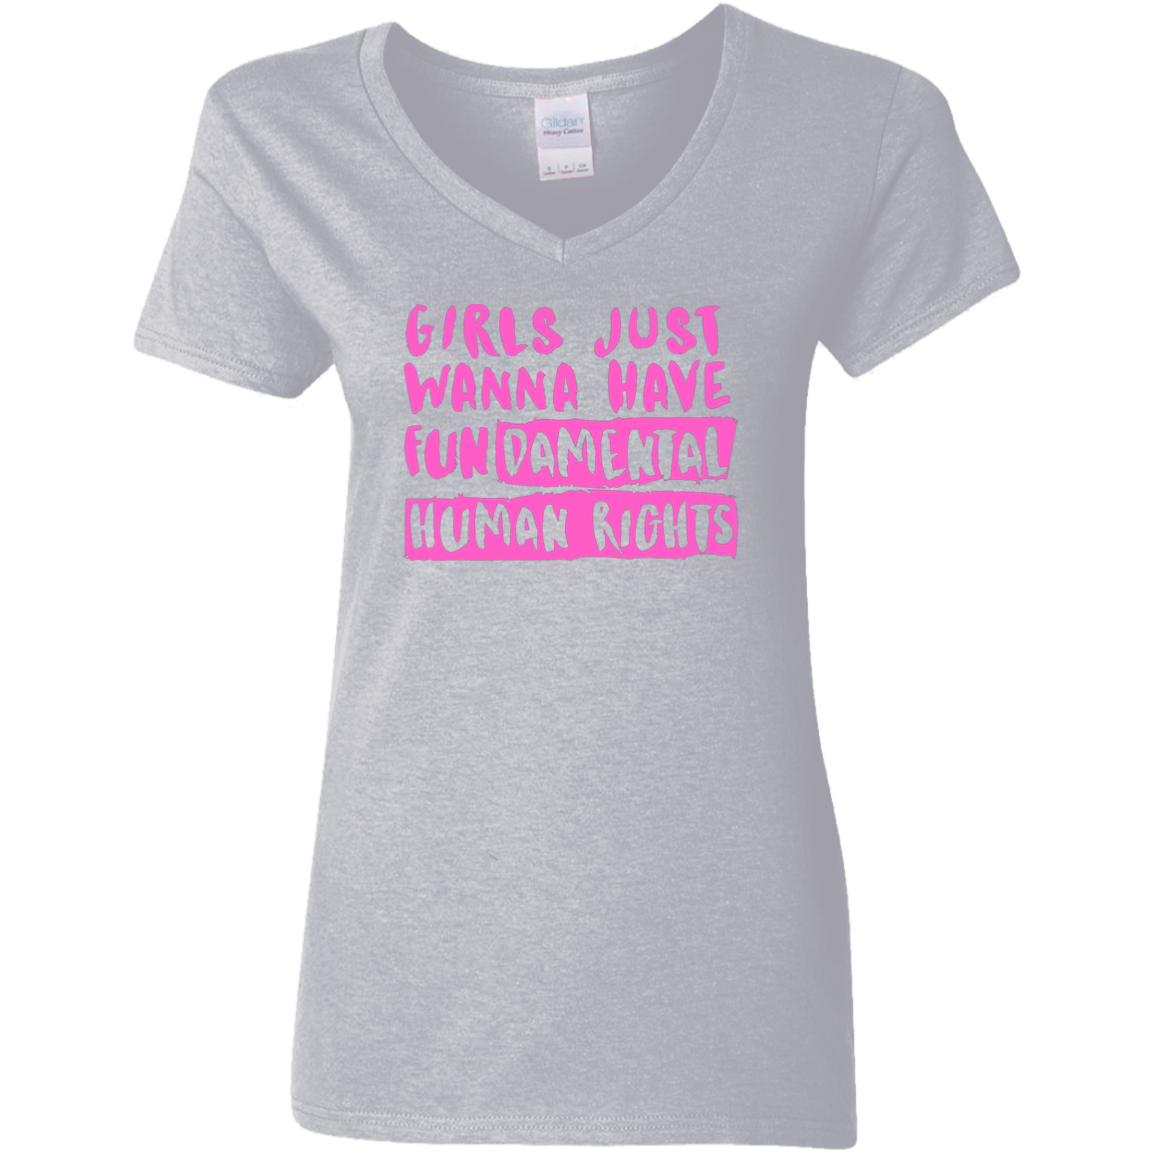 Girls Just Want To Have Fun... Ladies' V-Neck T-Shirt